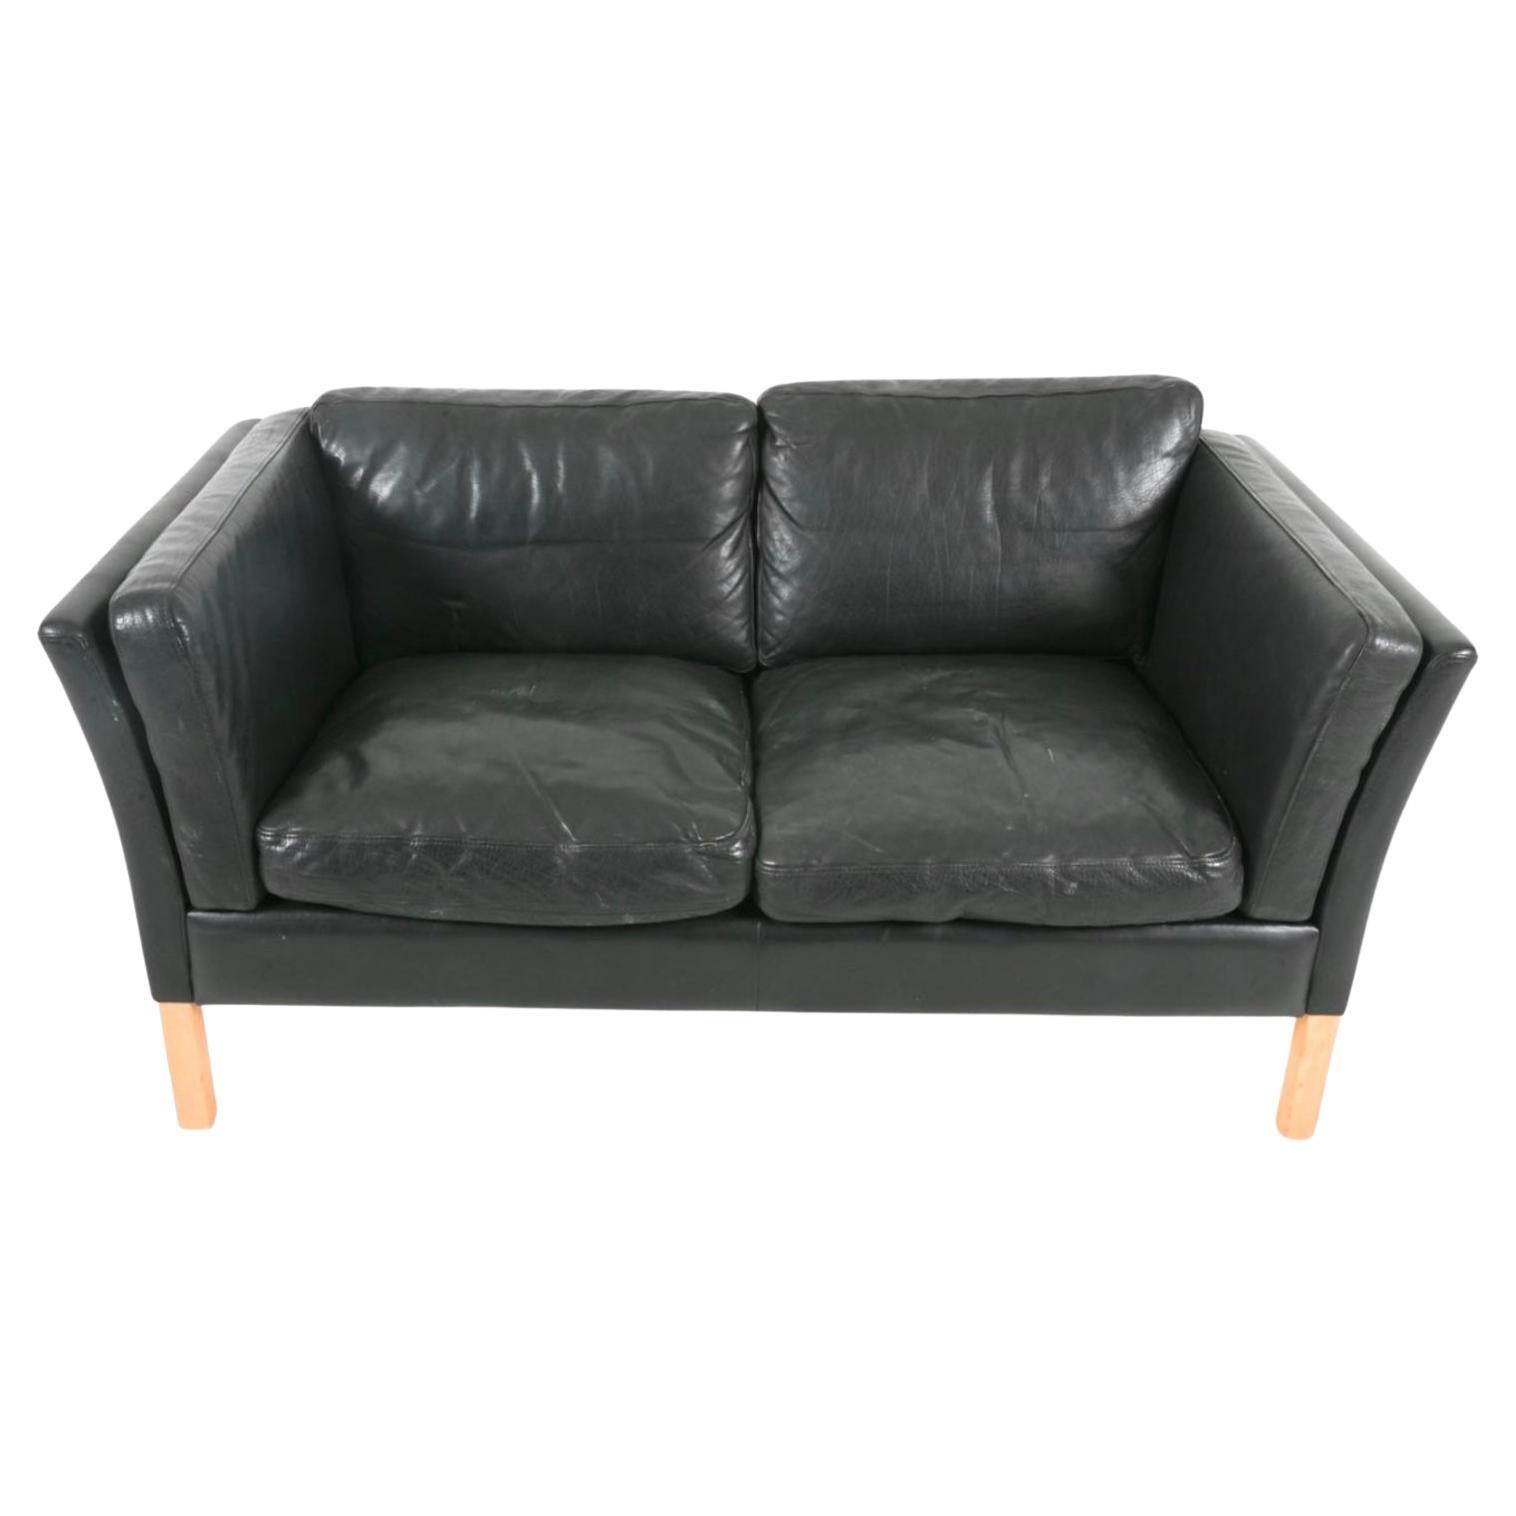 Mid Century Scandinavian modern Curved arm Low Mid century Danish modern Black leather 2 seat sofa with Birch wood legs. Style of Børge Mogensen. Beautiful thick Black leather is soft and shows signs of use but broken in nicely. Down filled